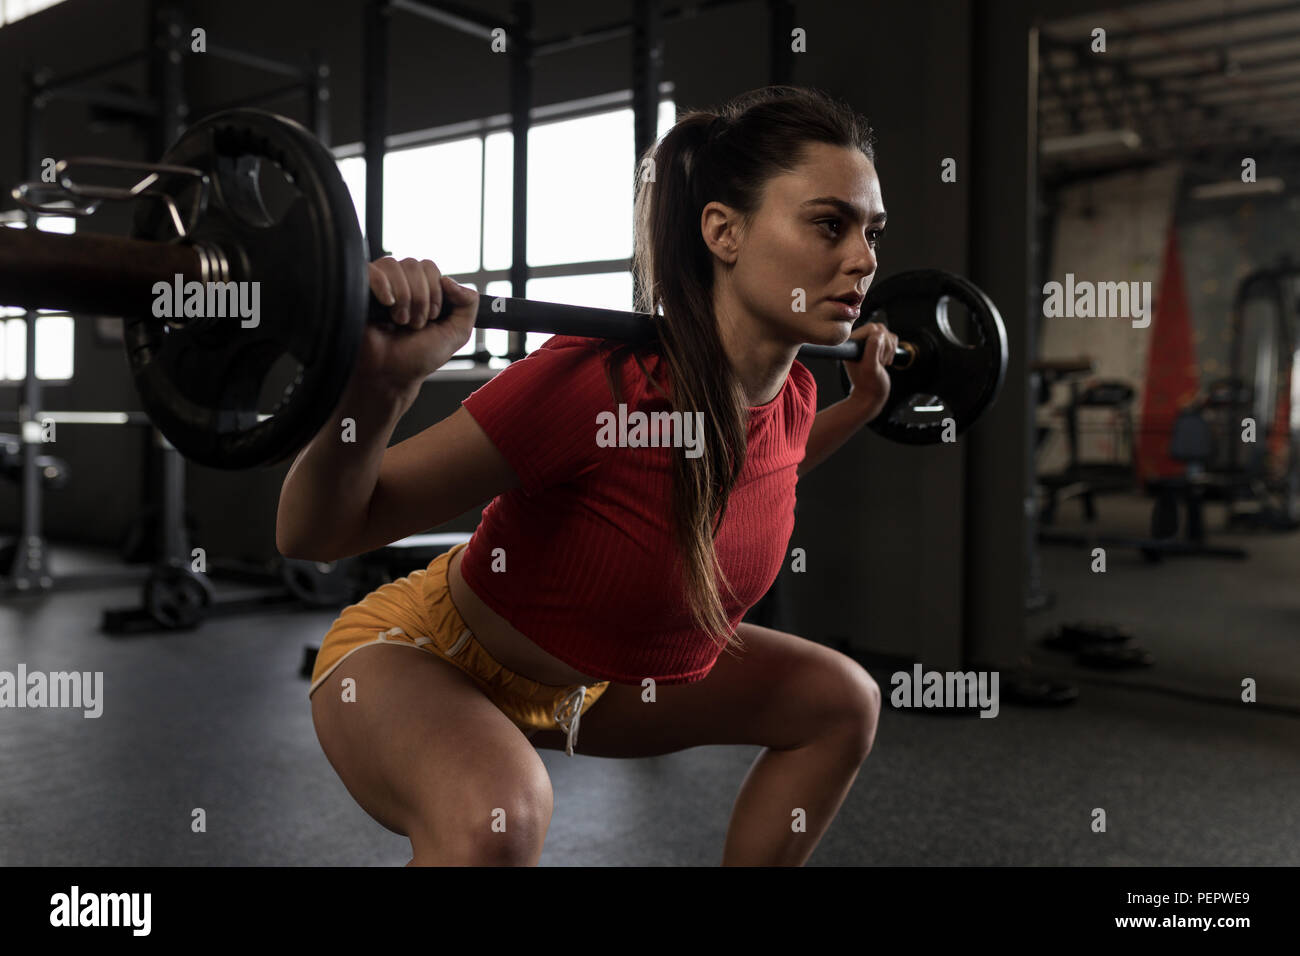 Woman doing a barbell squat in fitness studio Stock Photo